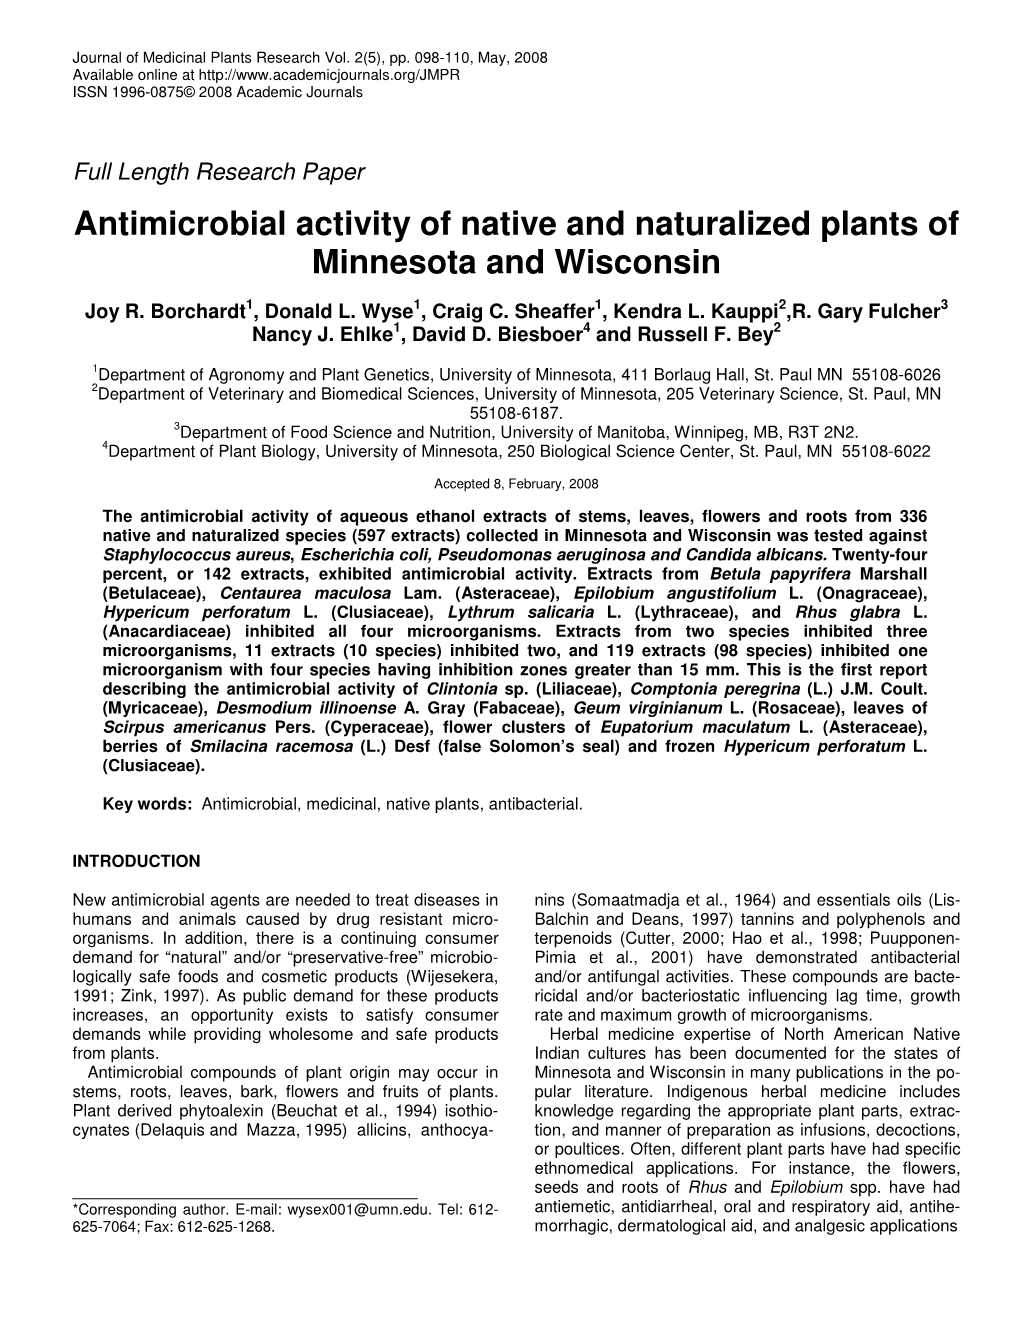 Antimicrobial Activity of Native and Naturalized Plants of Minnesota and Wisconsin